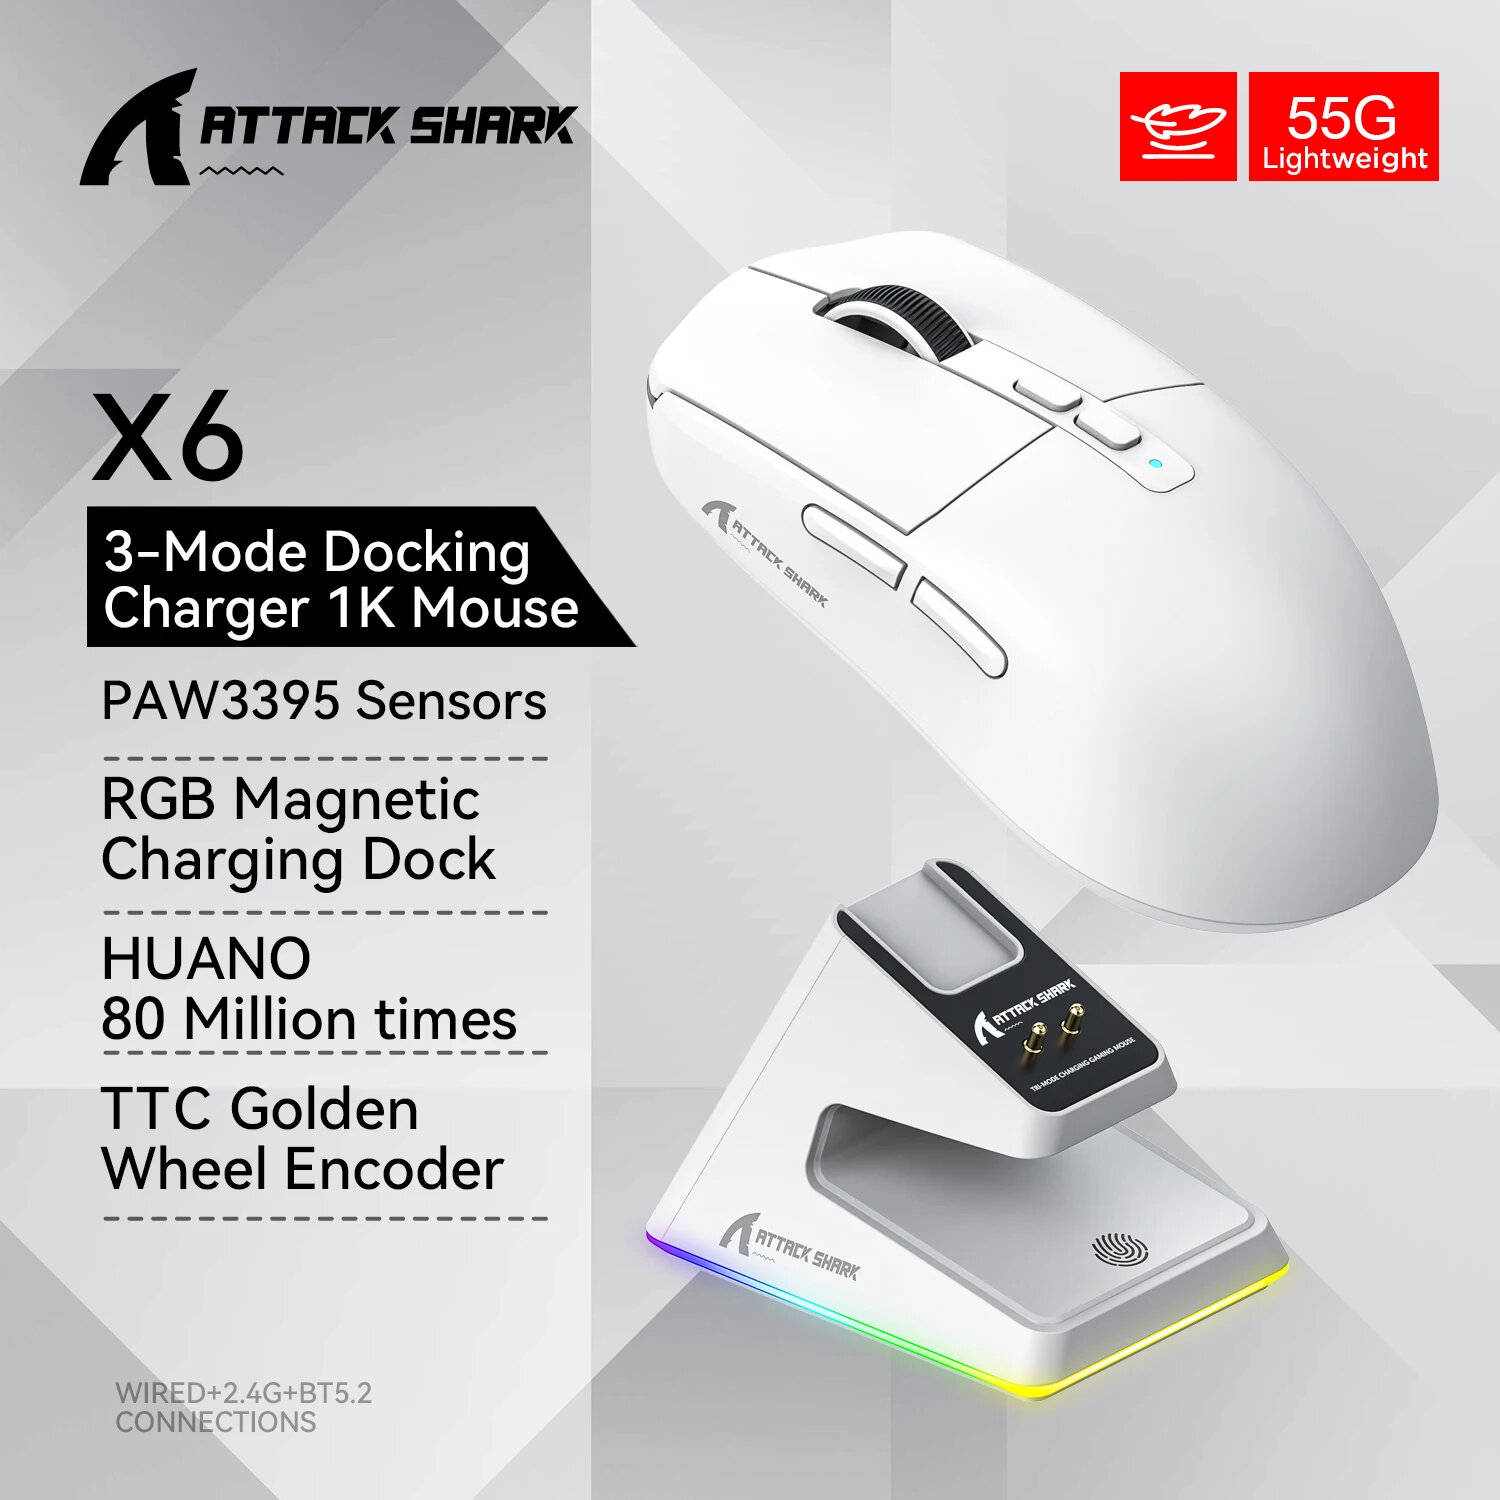 best price,attack,shark,x6,bluetooth,mouse,pixart,paw3395,discount